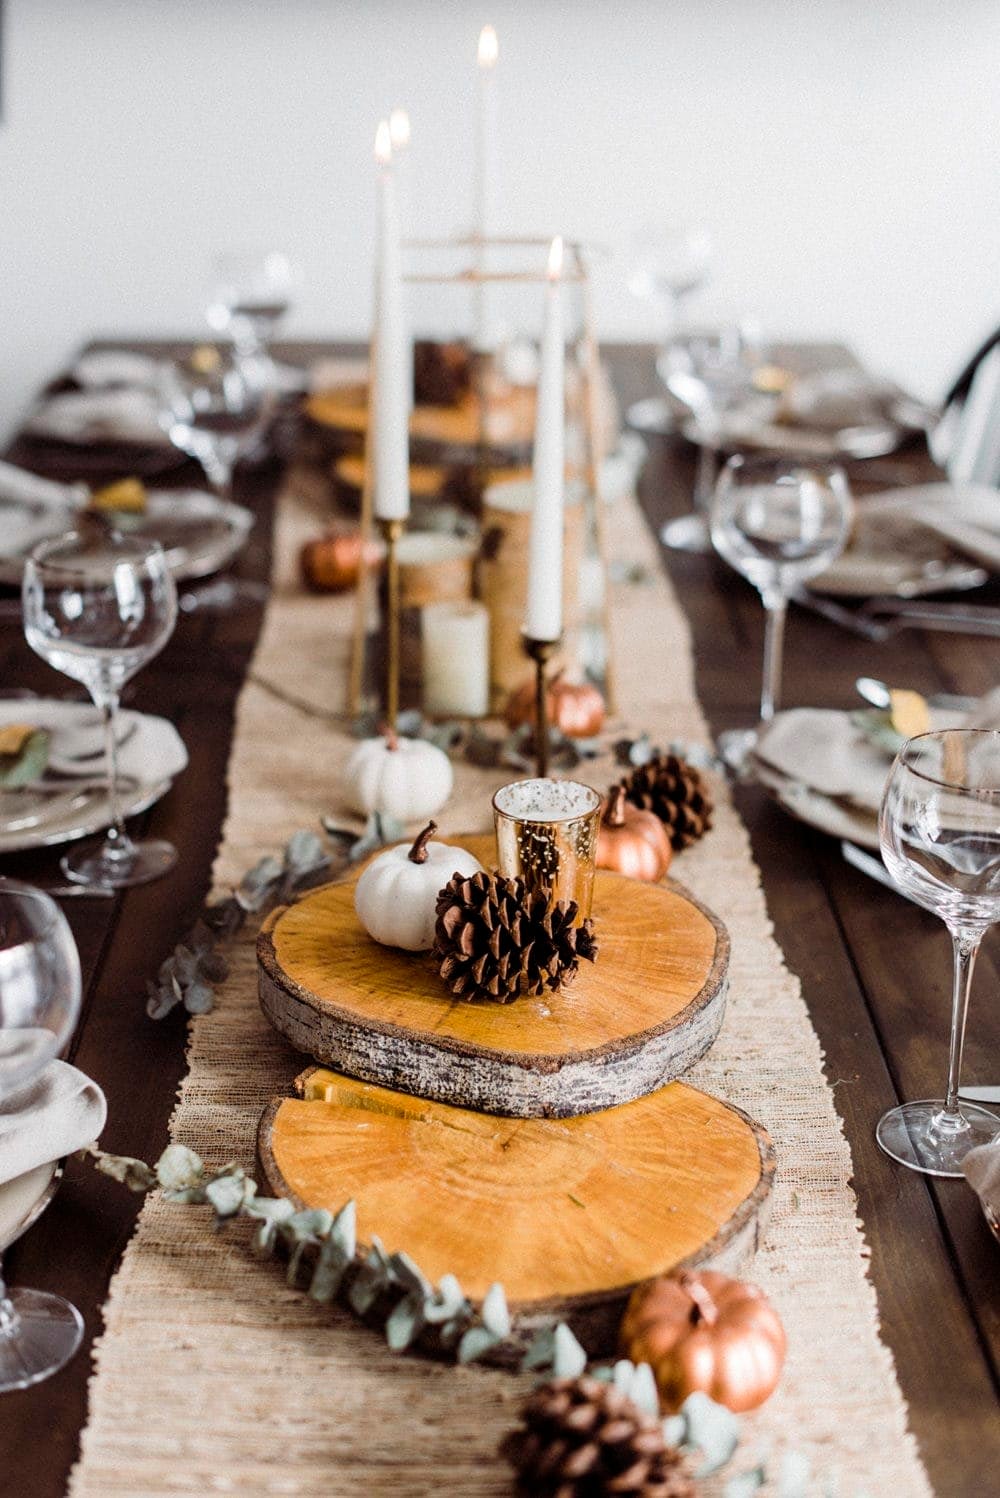 Thanksgiving table centerpieces with a jute table runner, round tree slices and vintage brass candlesticks